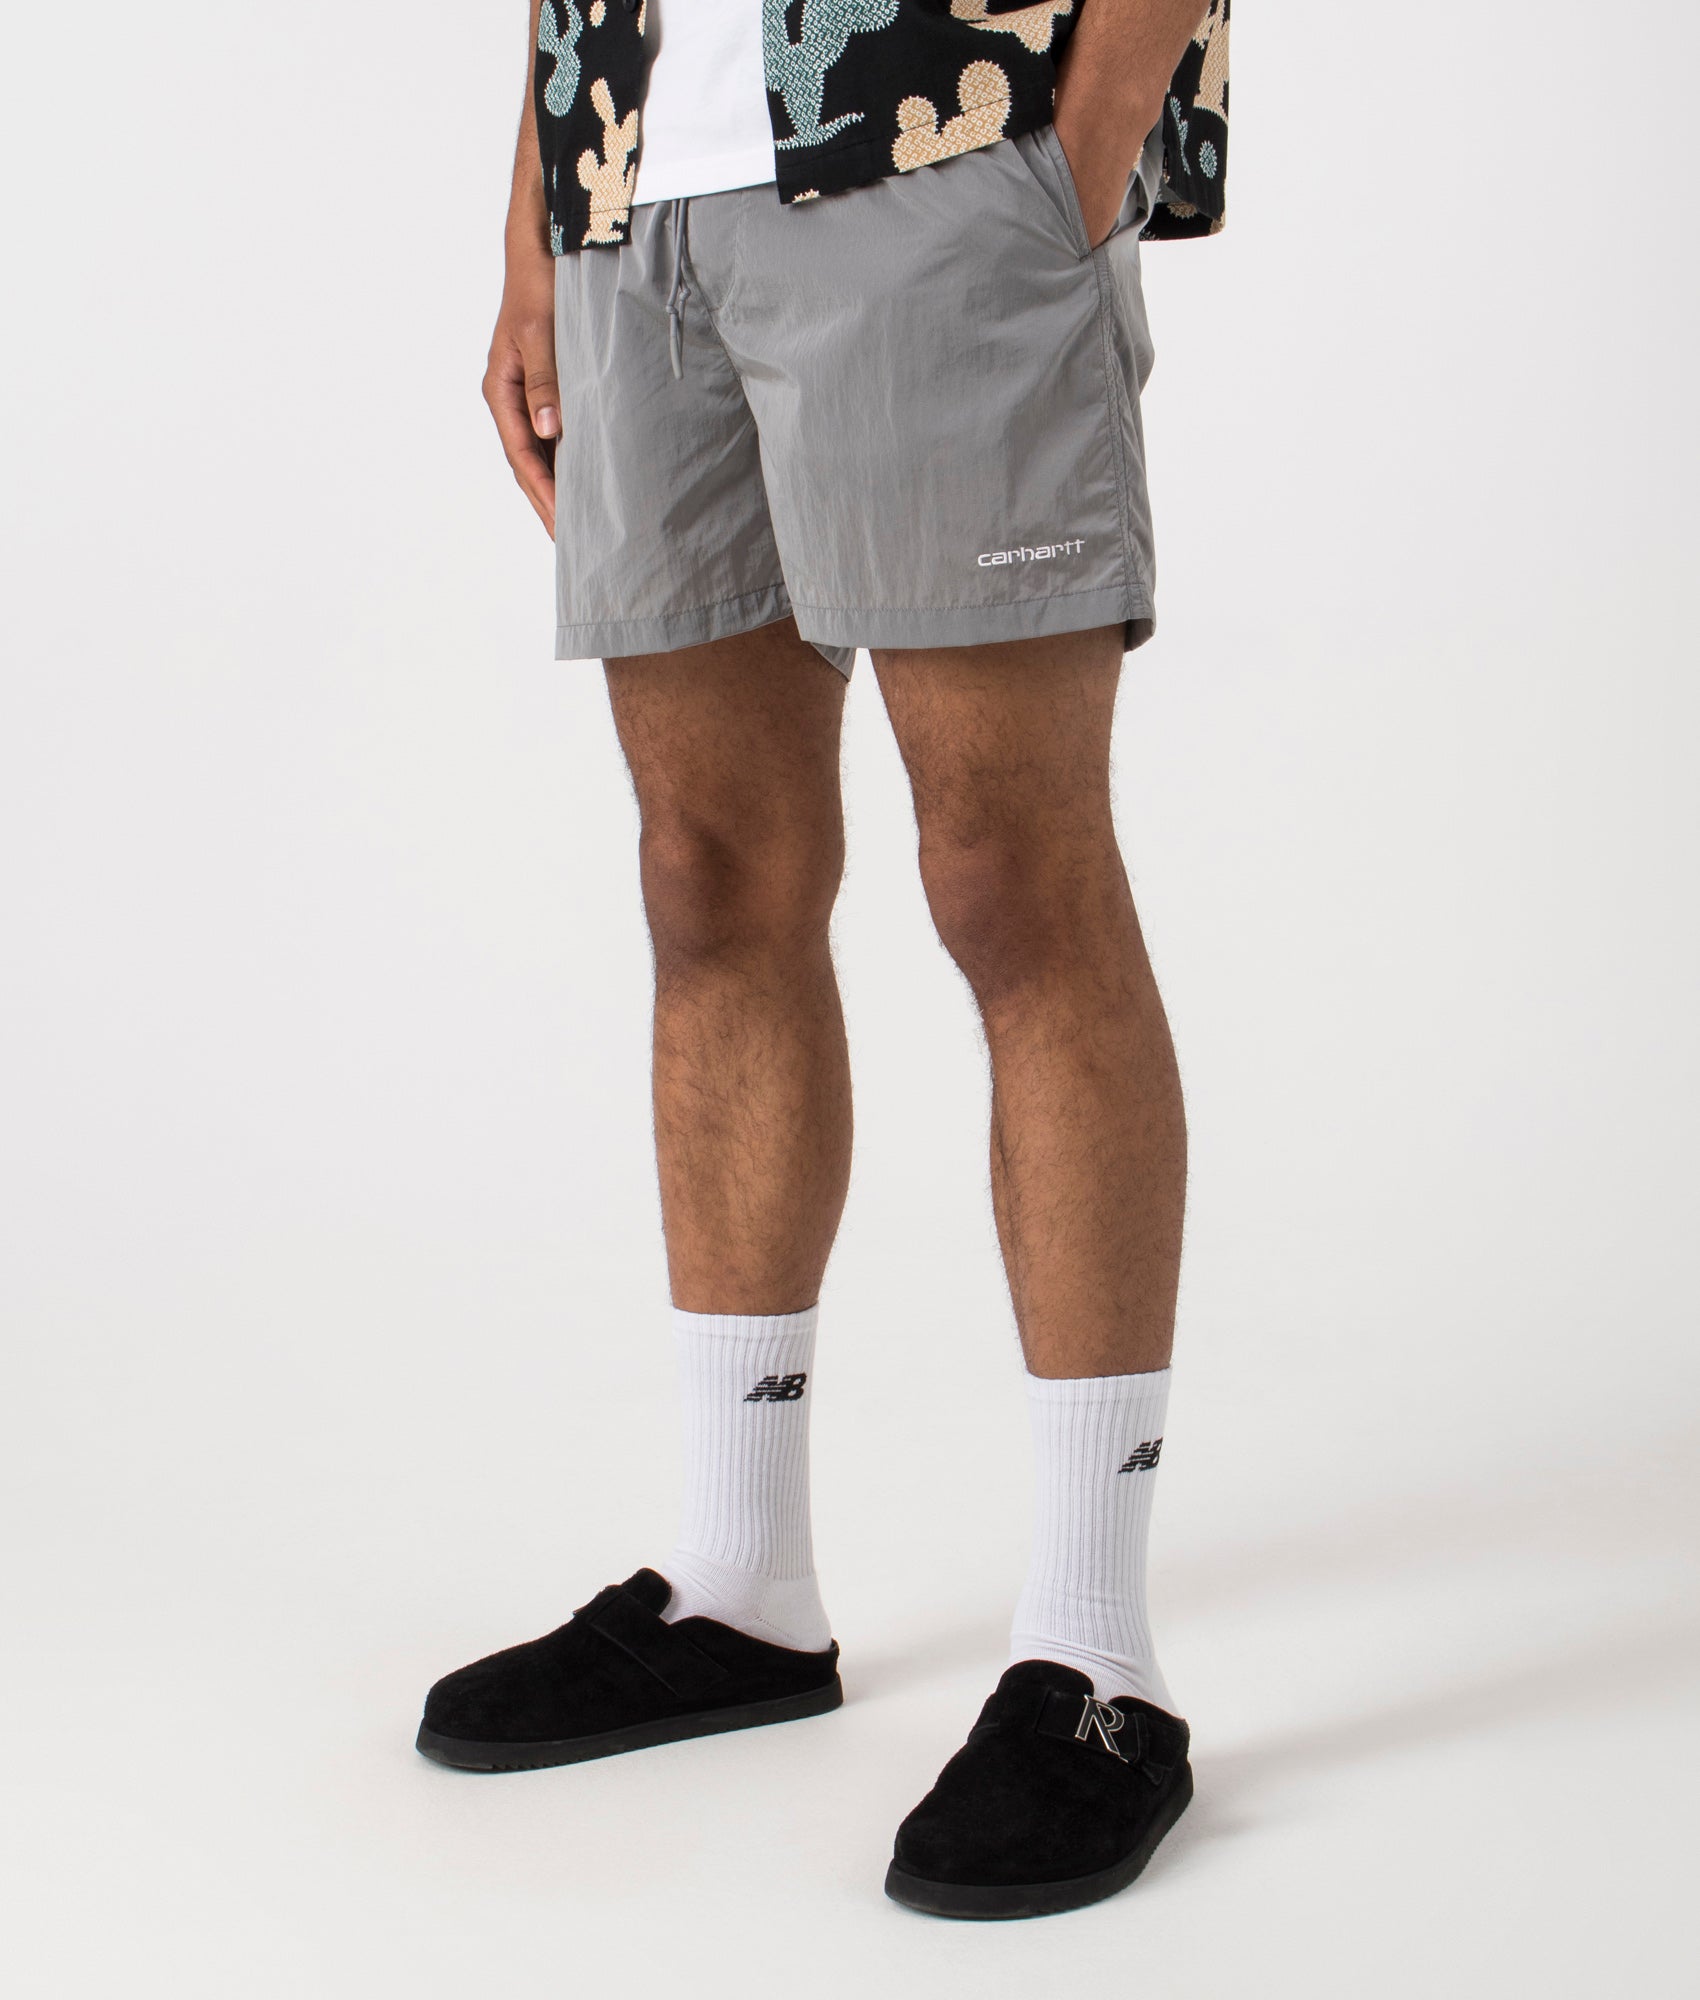 Carhartt WIP Mens Tobes Swim Trunks - Colour: 24OXX Sonic Silver/White - Size: Small